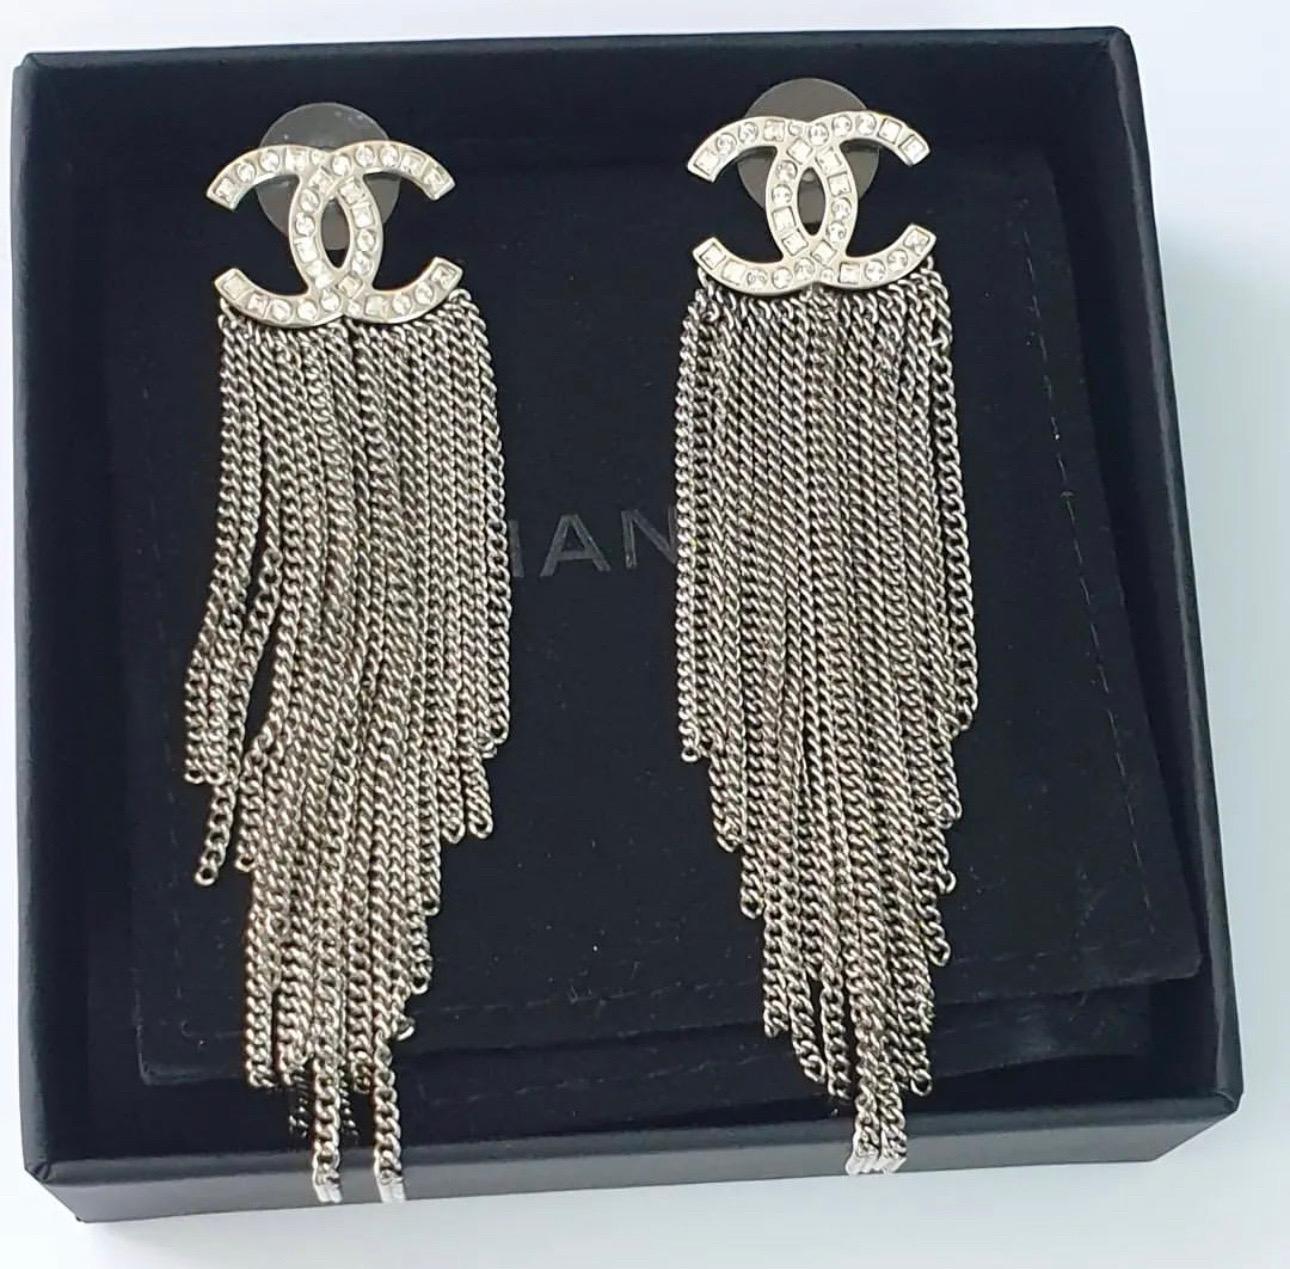 Glamorous and sophisticated, these Chanel earrings are a must-have accessory. Each earring consists of CC's with sparkling crystals with dangling fringe silvertone chains. Don't miss out on your opportunity to own these fabulous earrings.

Total